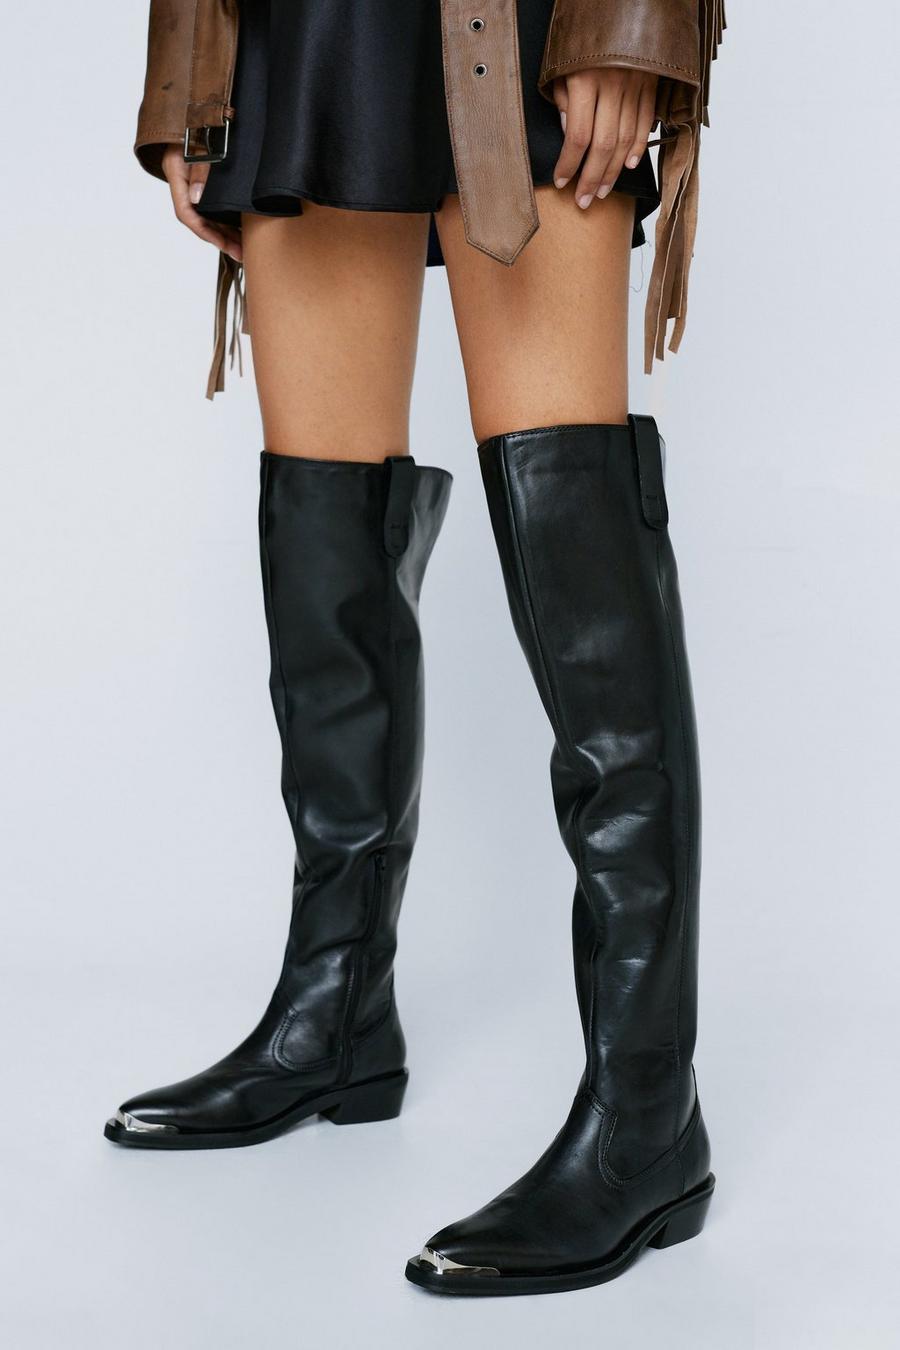 Real Leather Thigh High Metal Western Boot